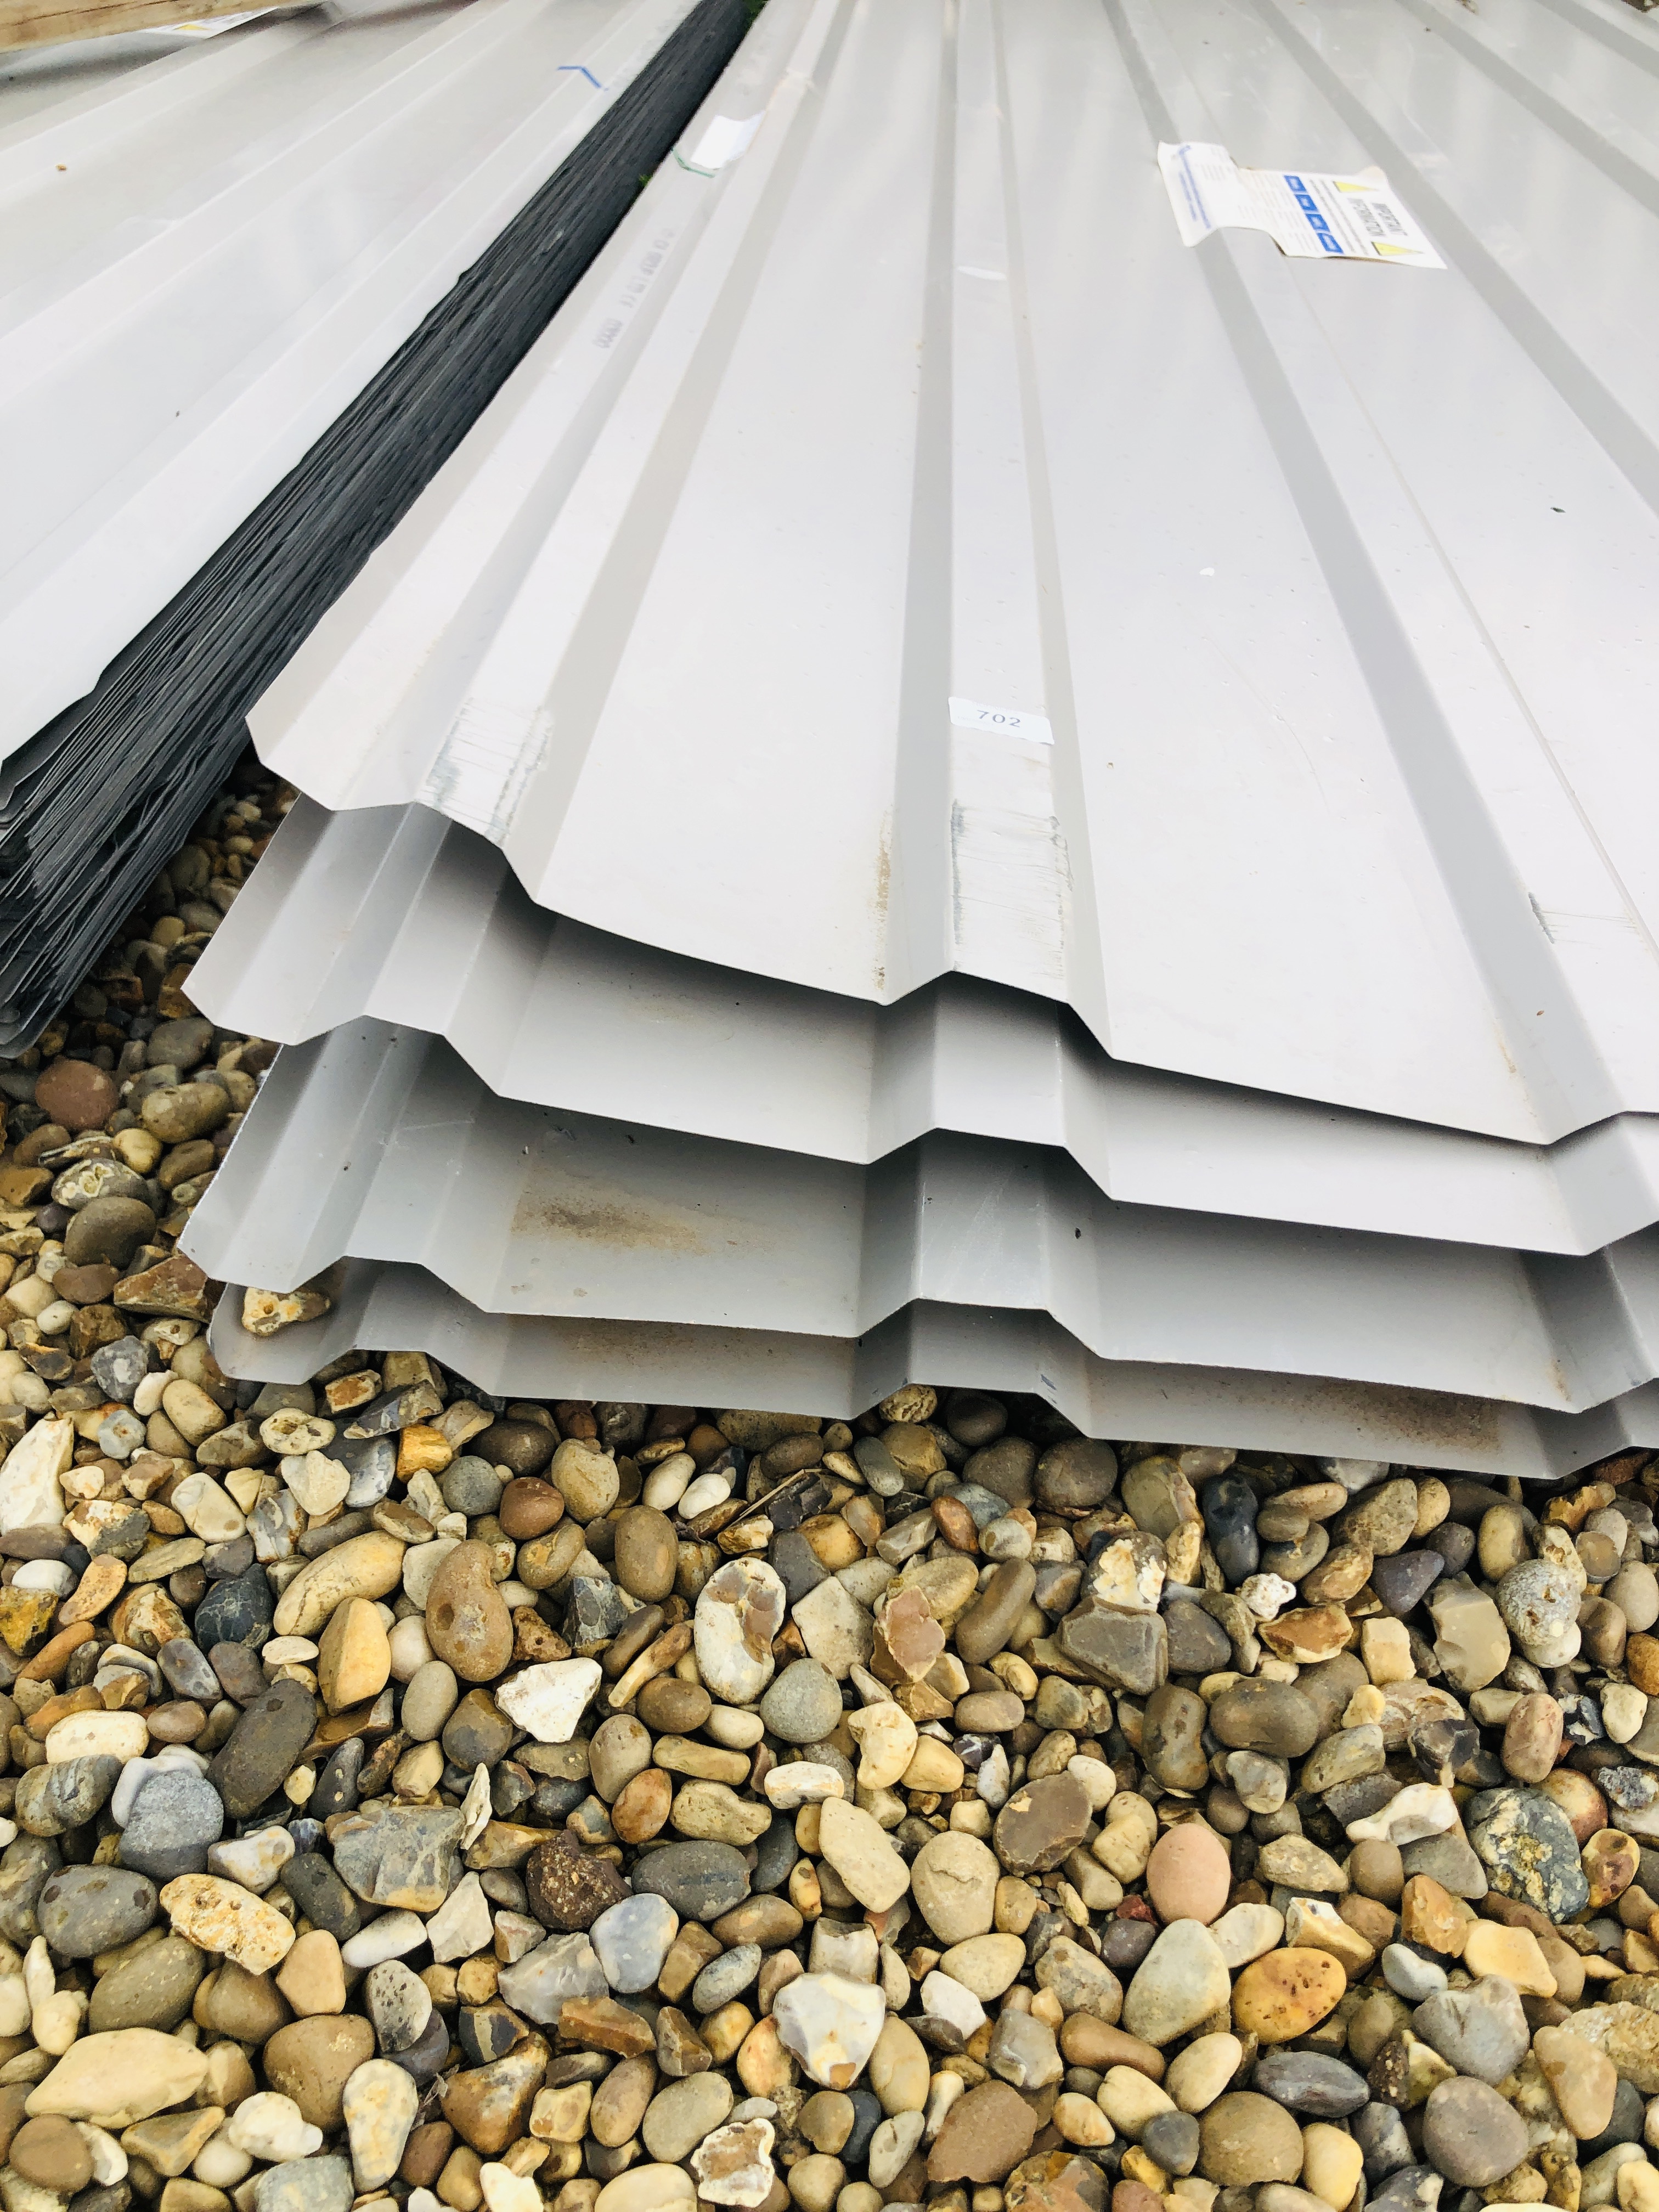 66 x 3M X 1M PROFILE STEEL ROOF LINER SHEETS - Image 2 of 2